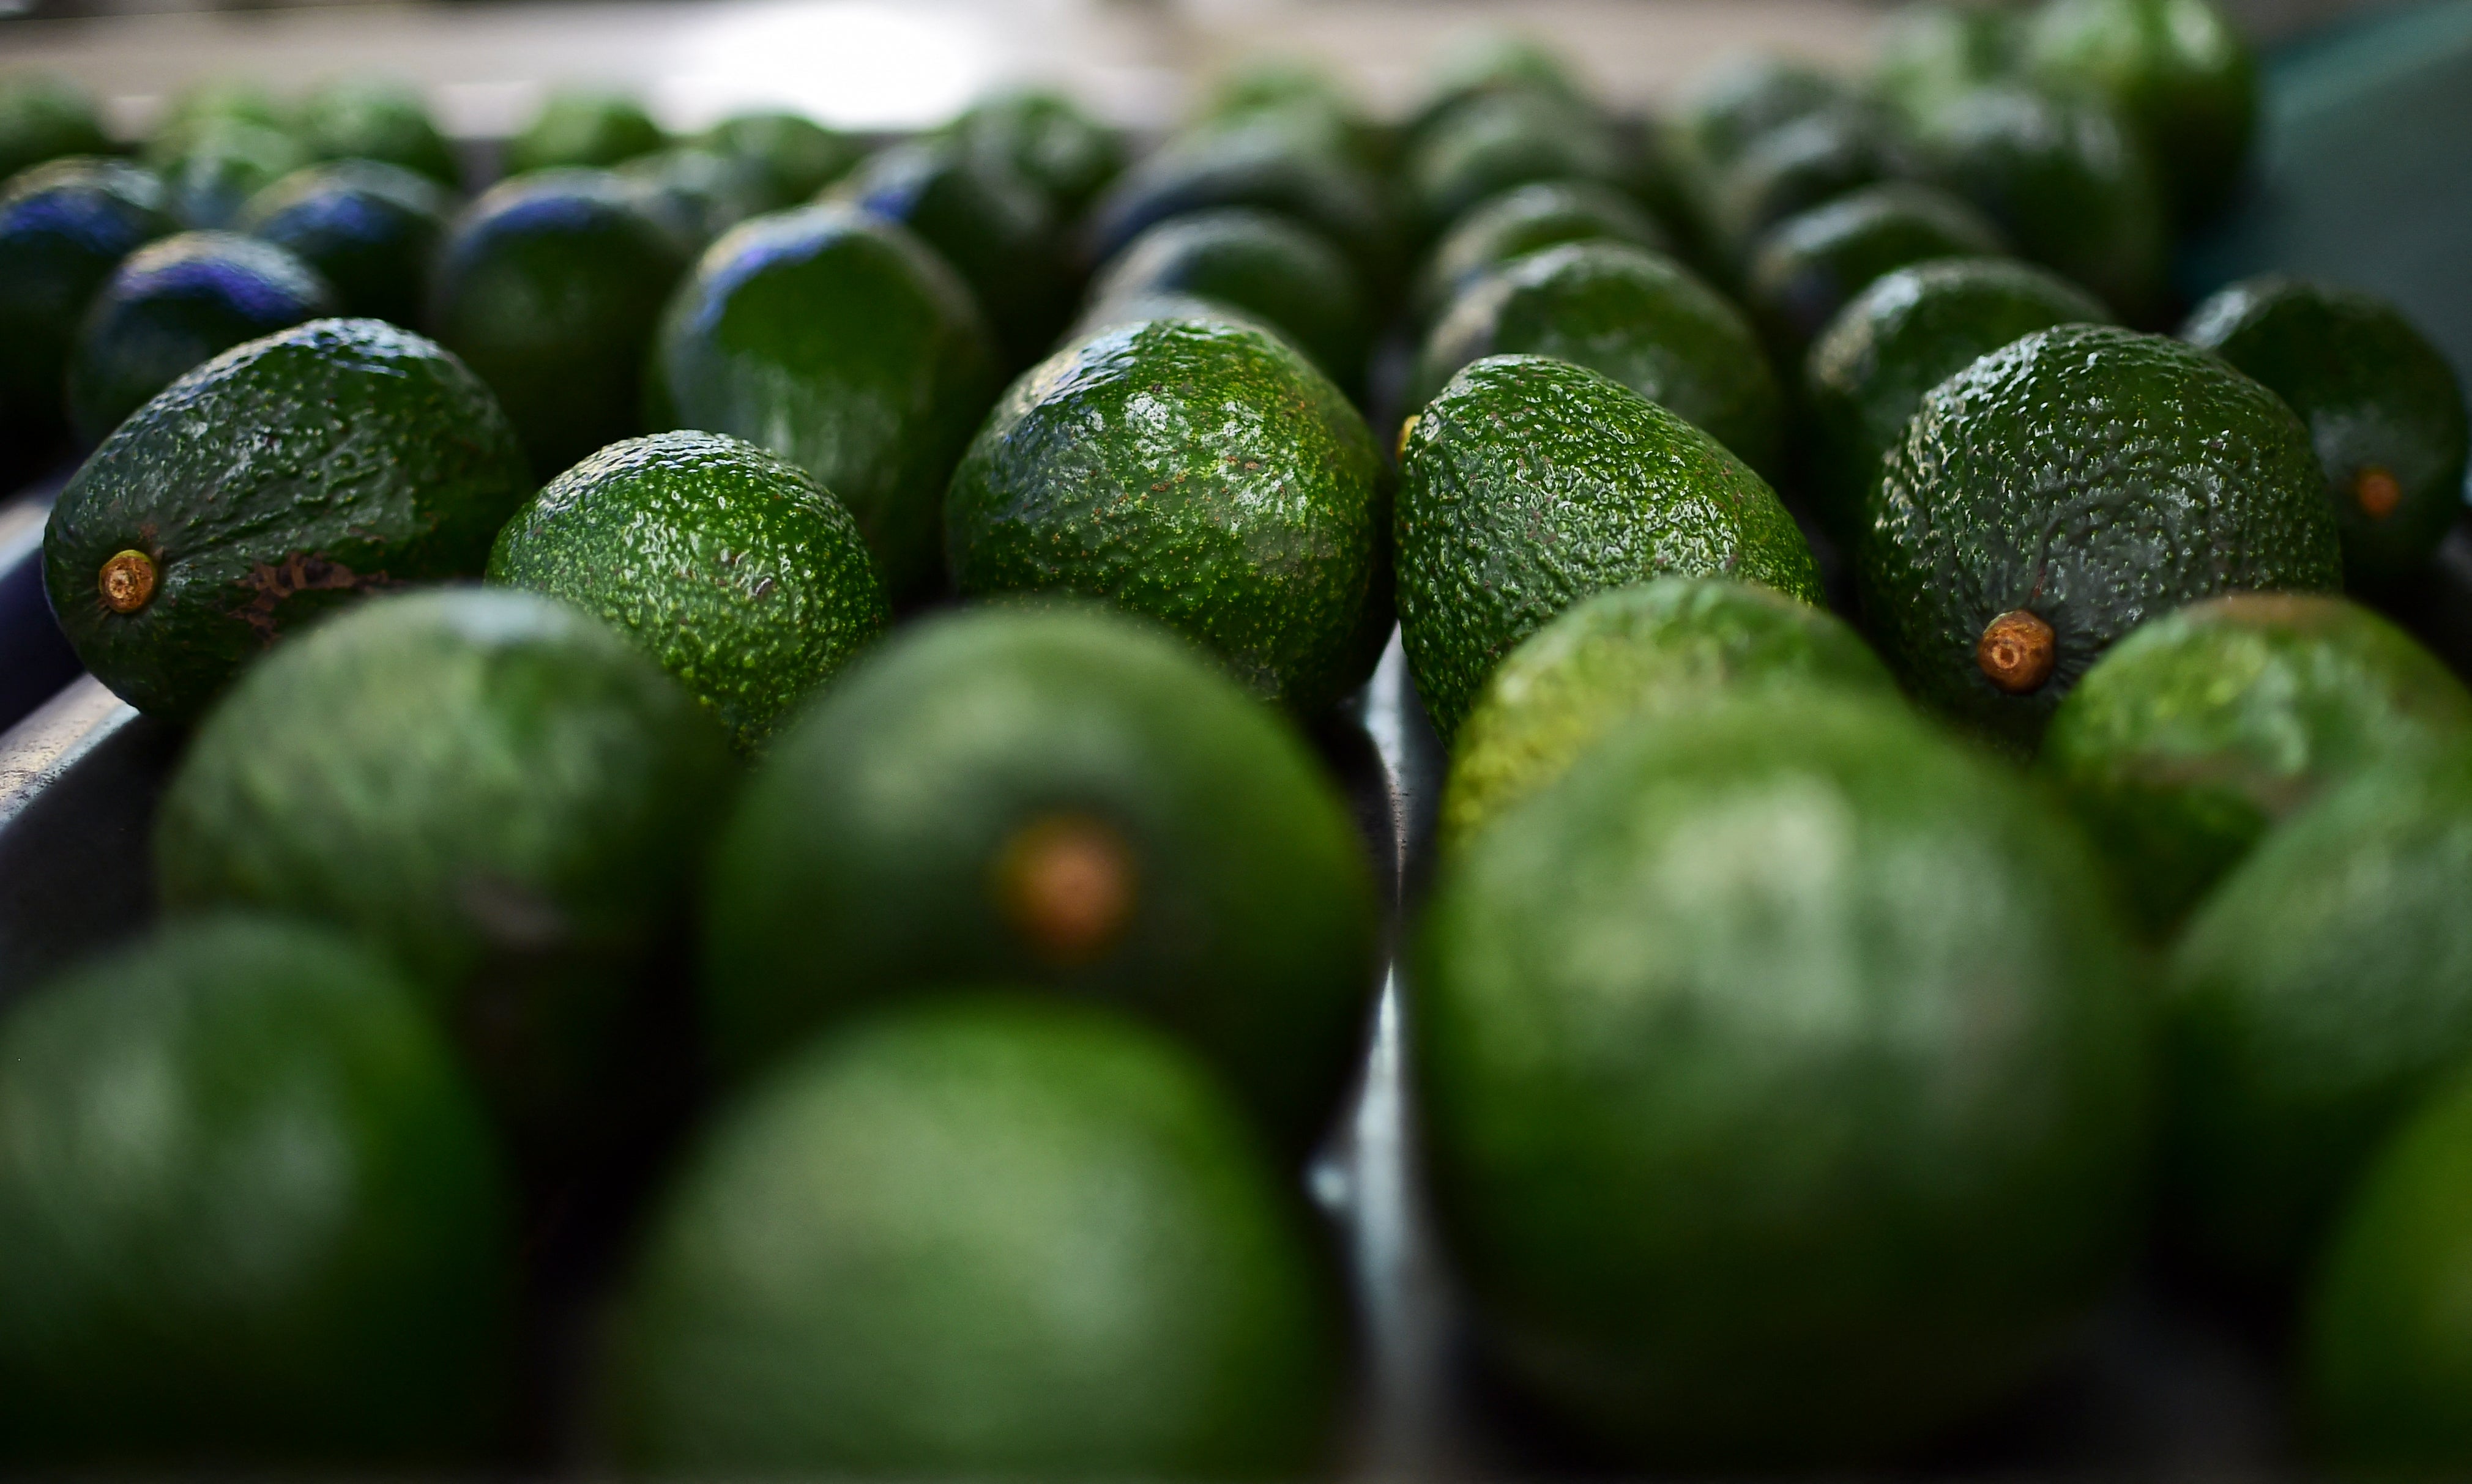 Close up of avocados lined up in rows on a belt.